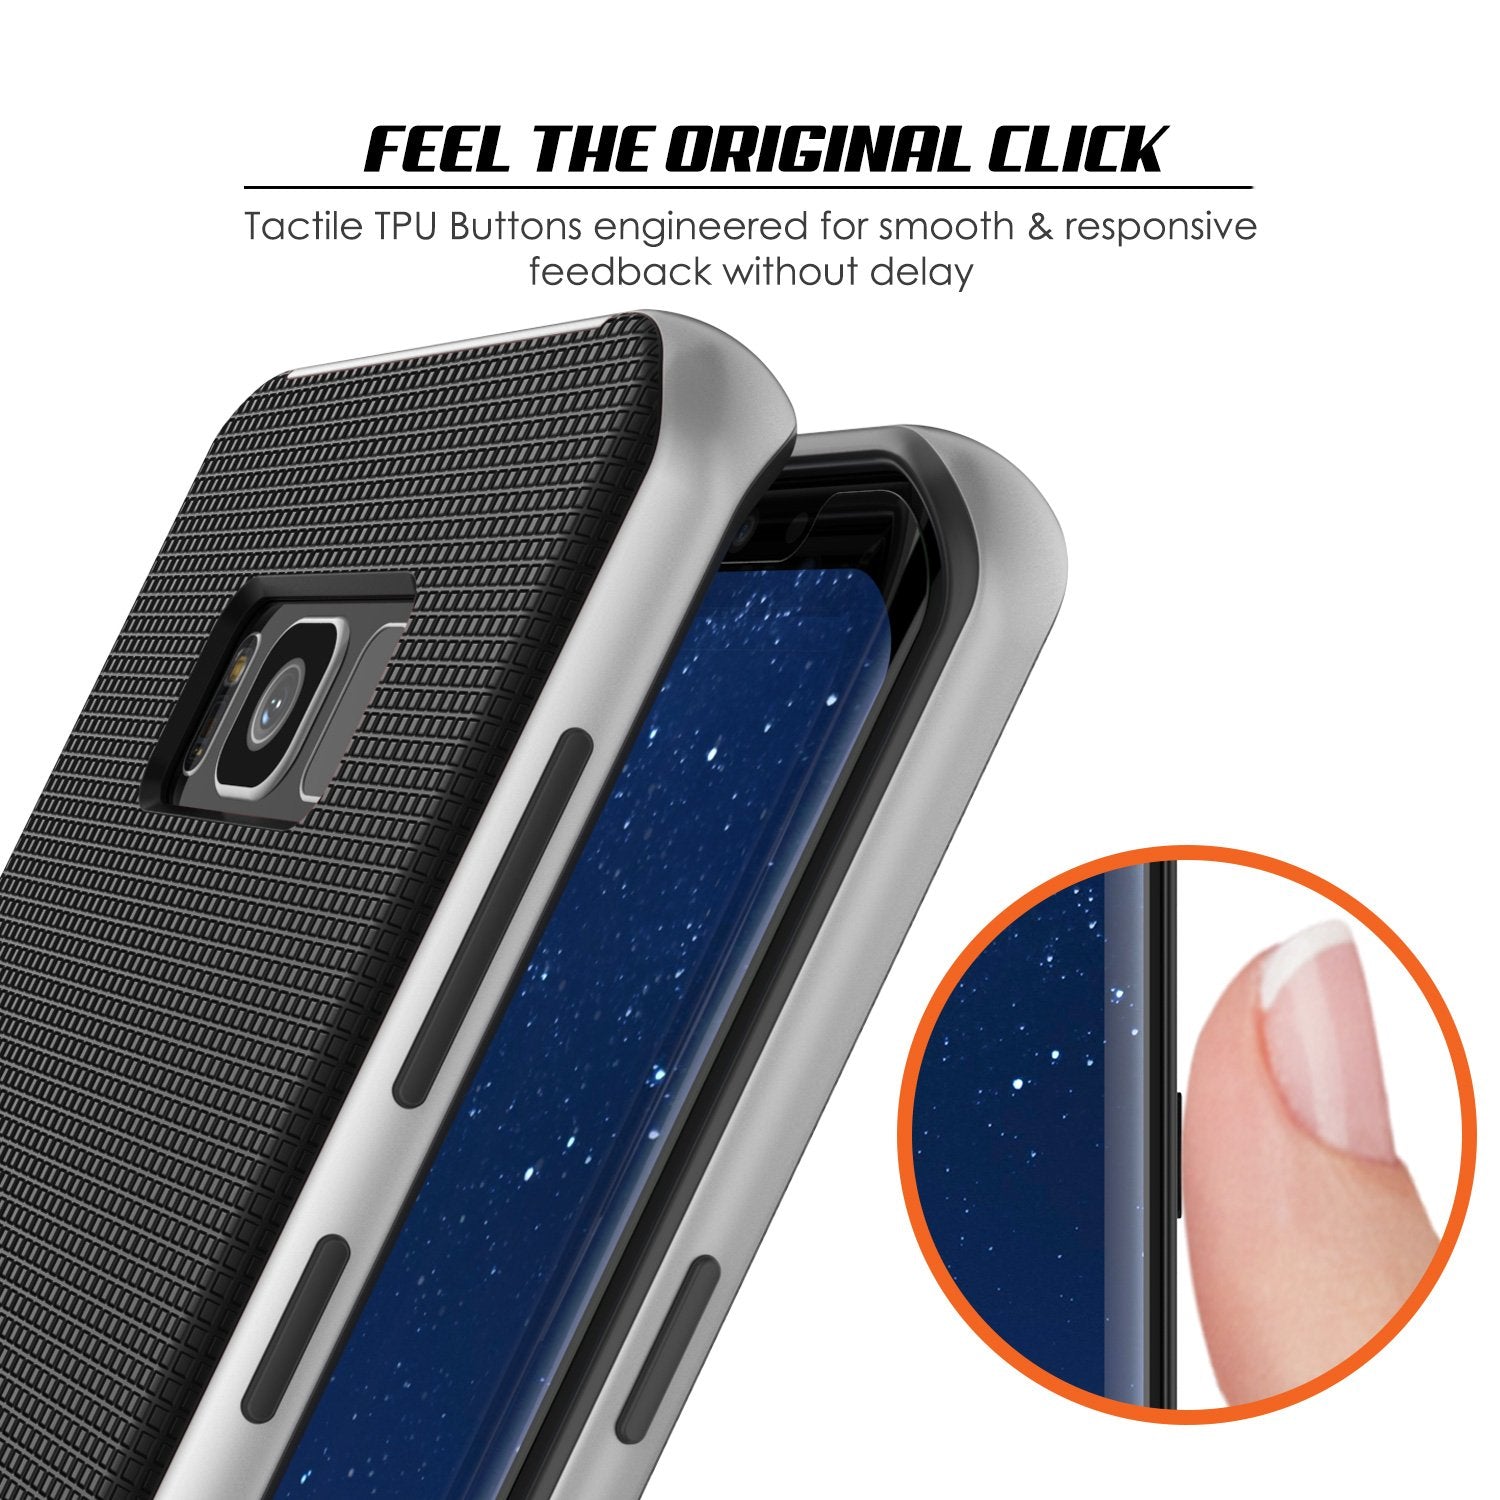 Galaxy S8 PLUS Case, PunkCase [Stealth Series] Hybrid 3-Piece Shockproof Dual Layer Cover [Non-Slip] [Soft TPU + PC Bumper] with PUNKSHIELD Screen Protector for Samsung S8+ [Silver] - PunkCase NZ